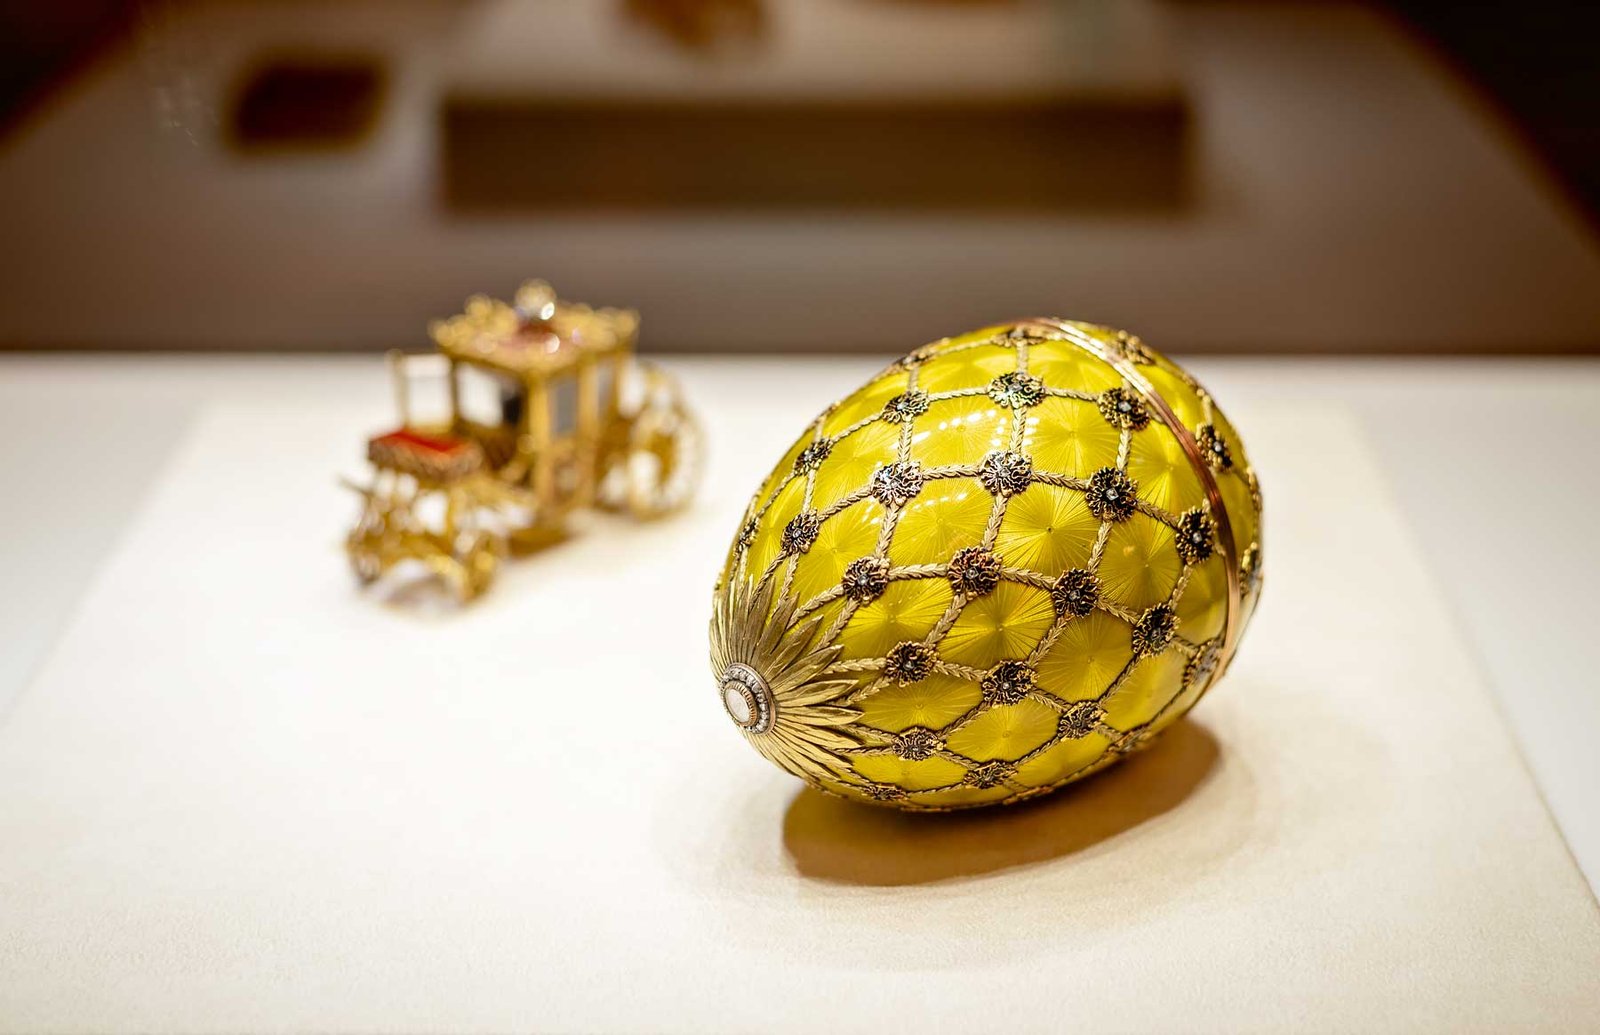 Fabergé Egg at the Fabergé Museum | St Petersburg, Russia - Things to do on your first visit